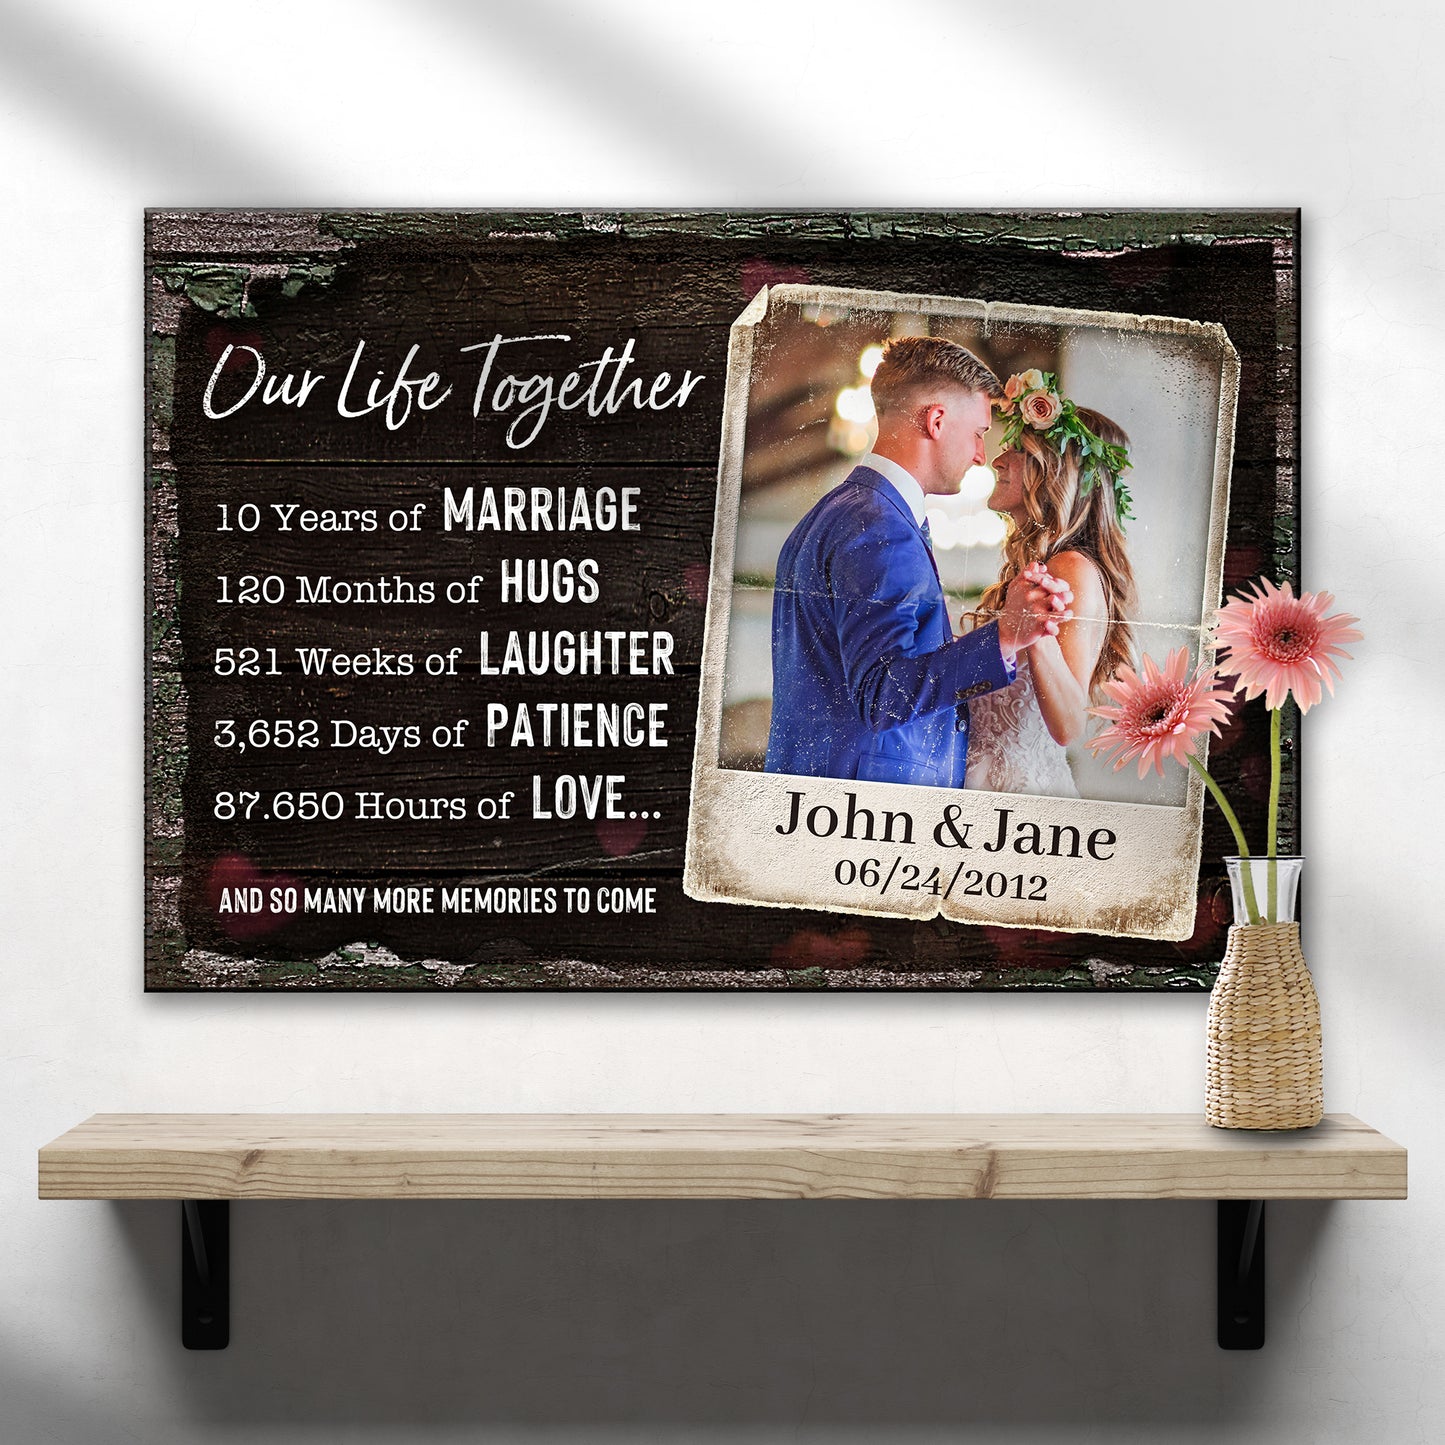 Our Life Together Couple Sign - Image by Tailored Canvases